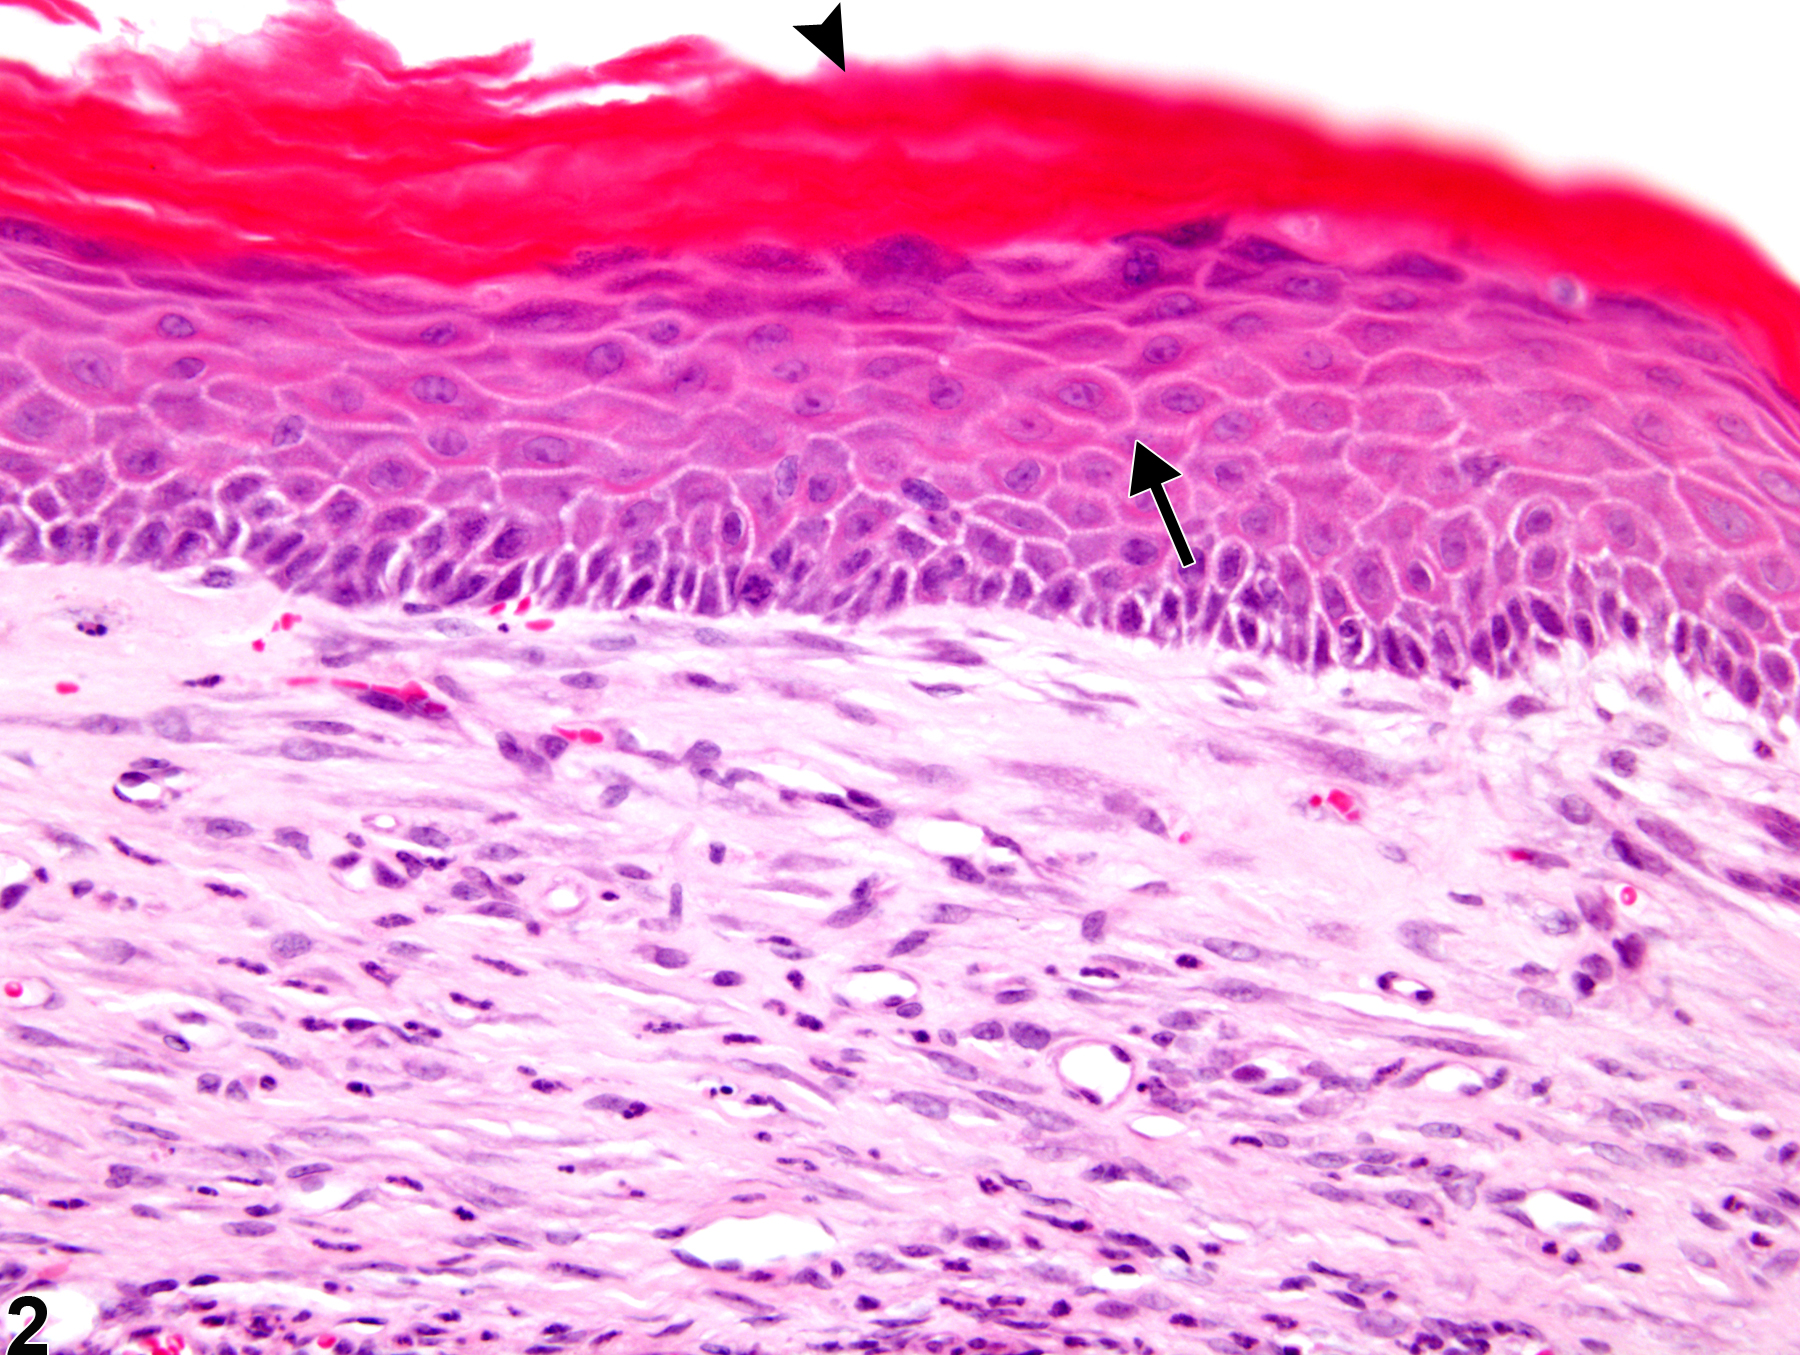 Image of cornea hyperplasia, squamous in the eye from a male B6C3F1 mouse in a chronic study